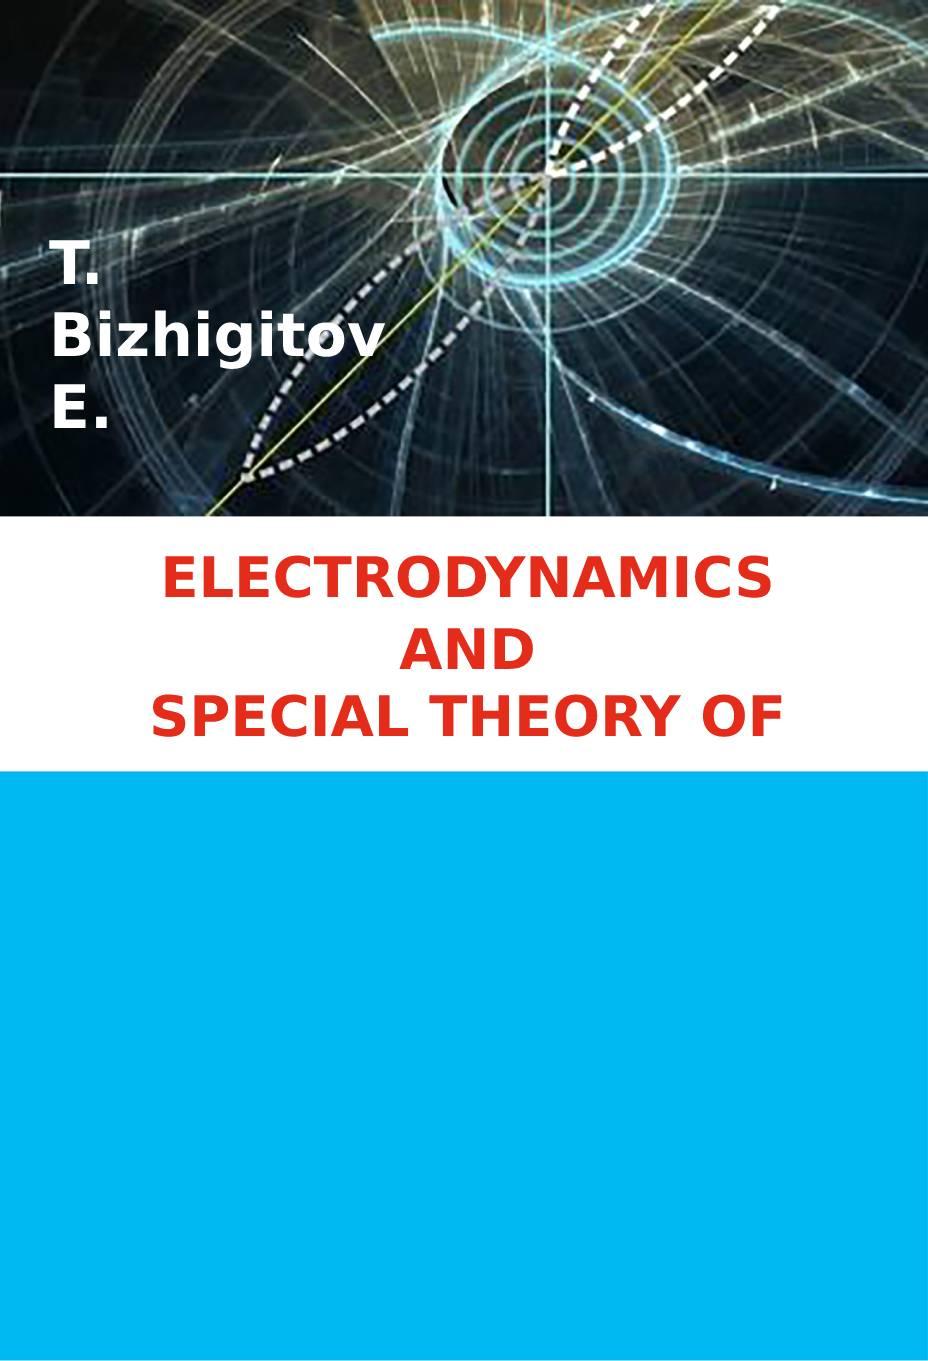 Electrodynamics and special theory of relativity.